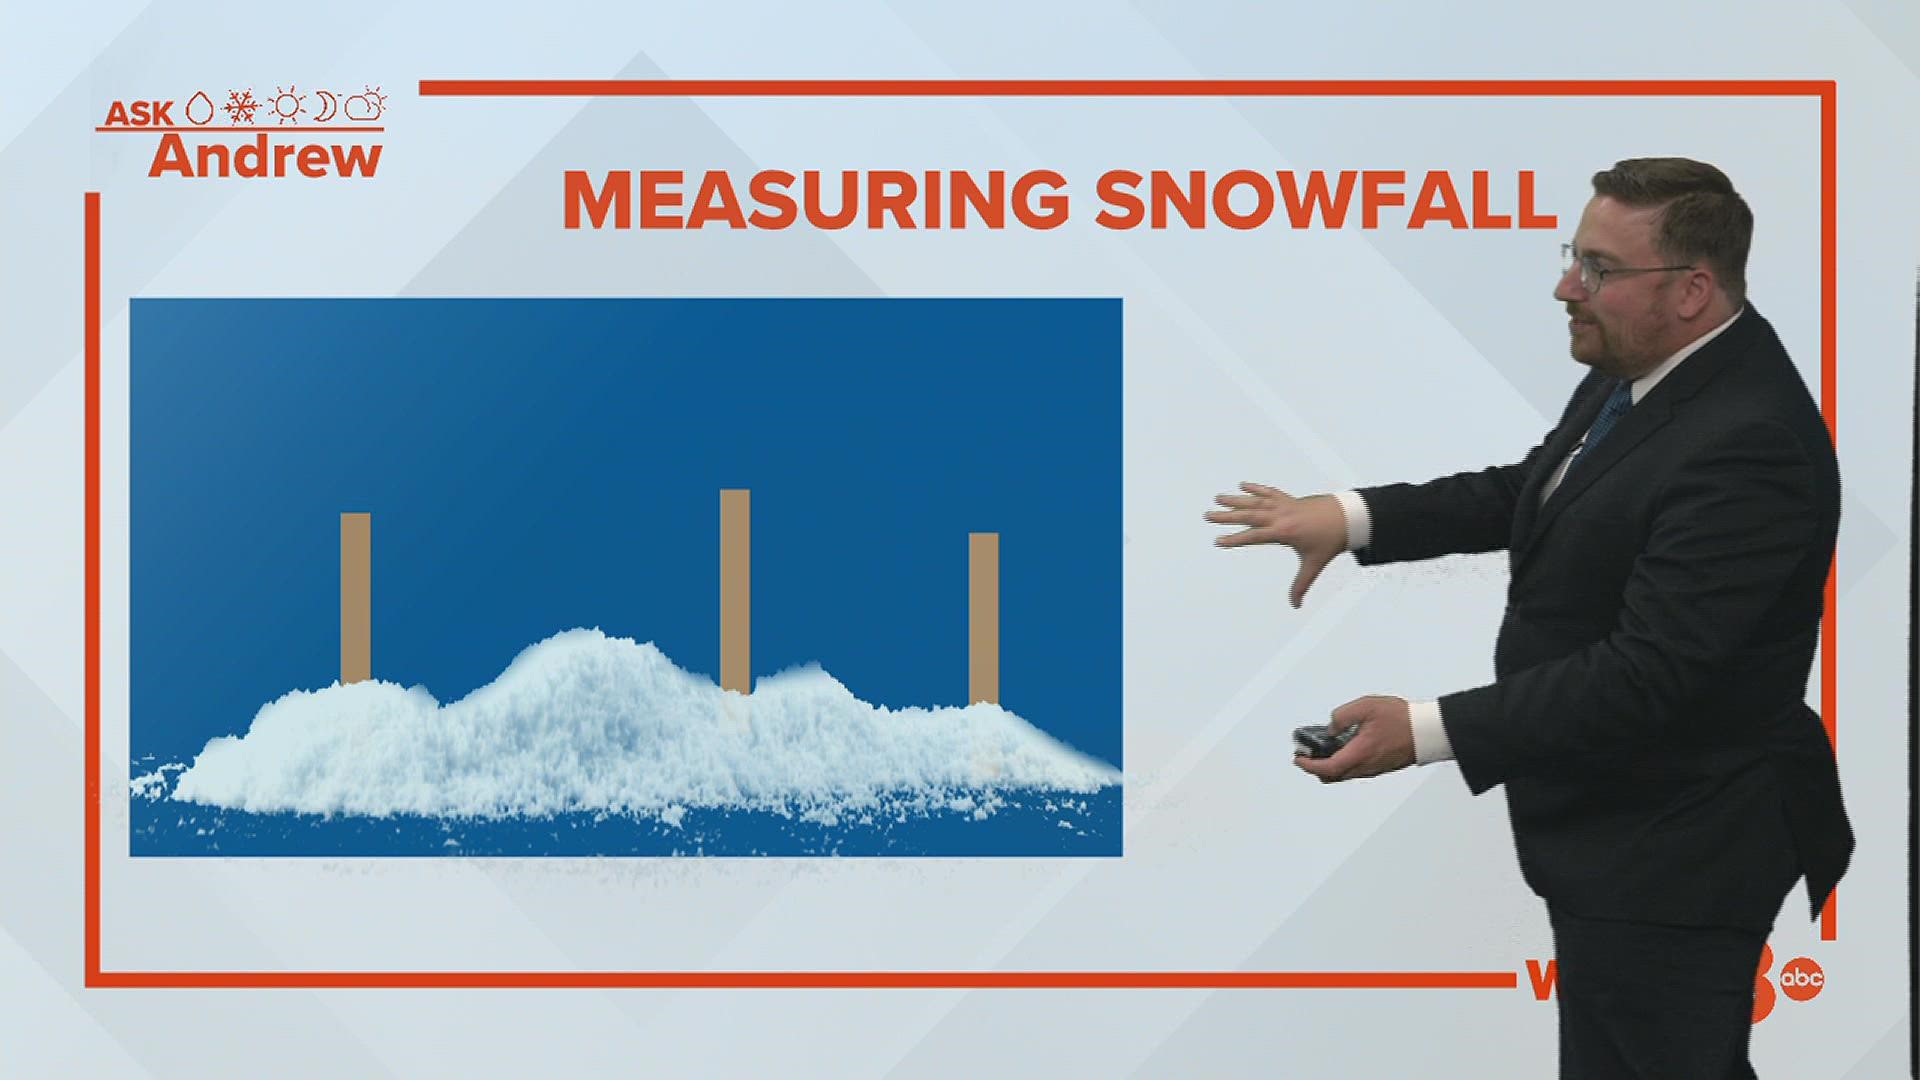 Strong winds can blow snow around making it difficult to measure. Follow these steps to get the most accurate measurement.